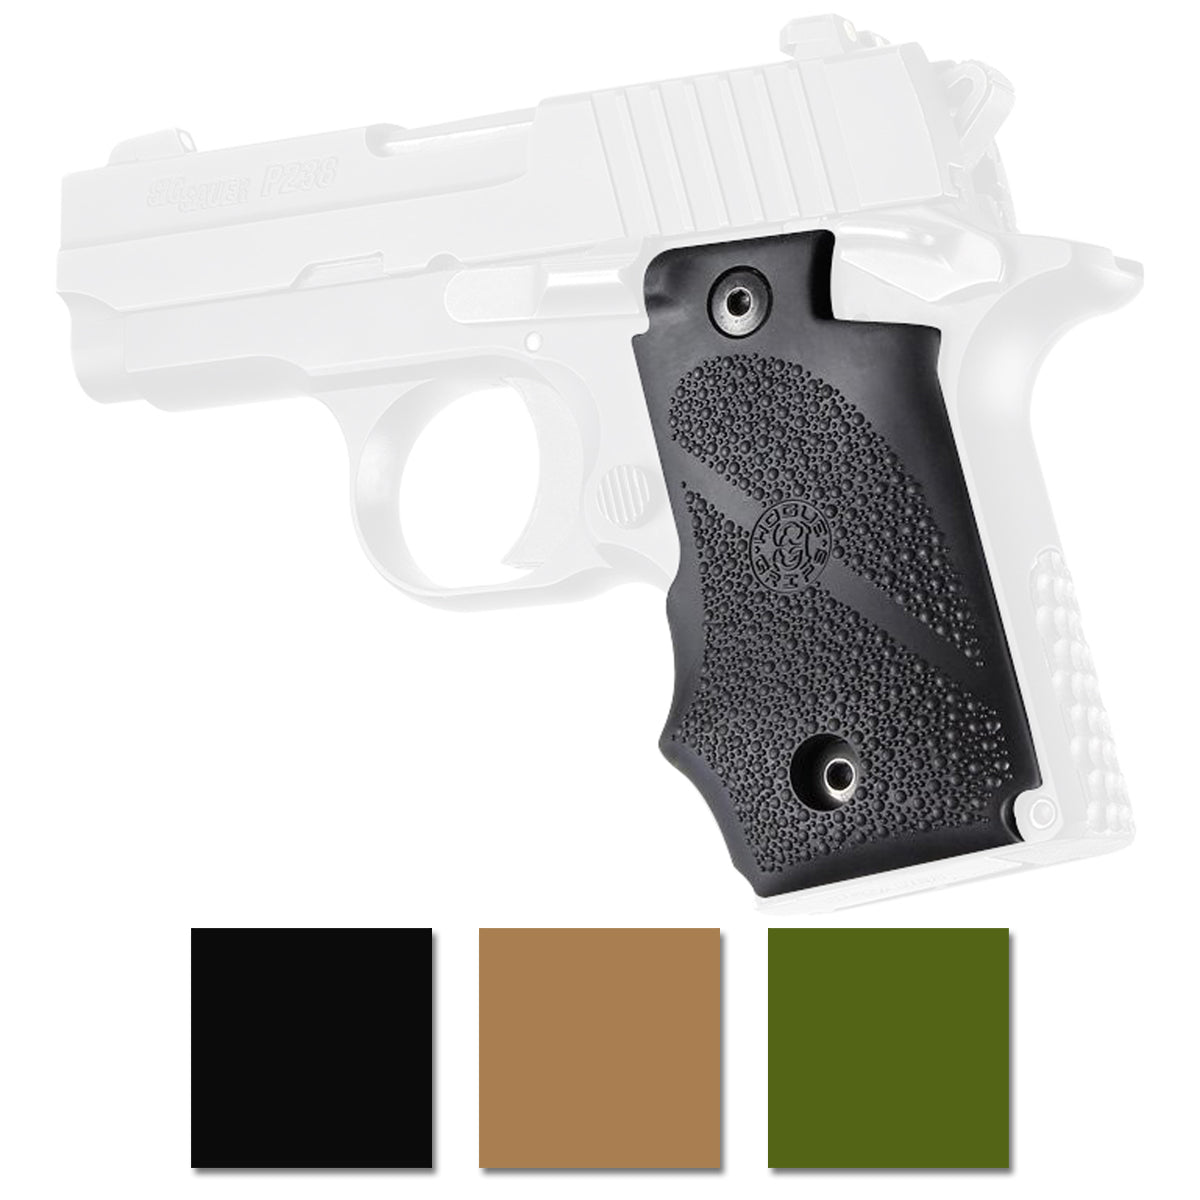 Hogue SIG SAUER P238 Rubber Grip with Finger Grooves Hogue